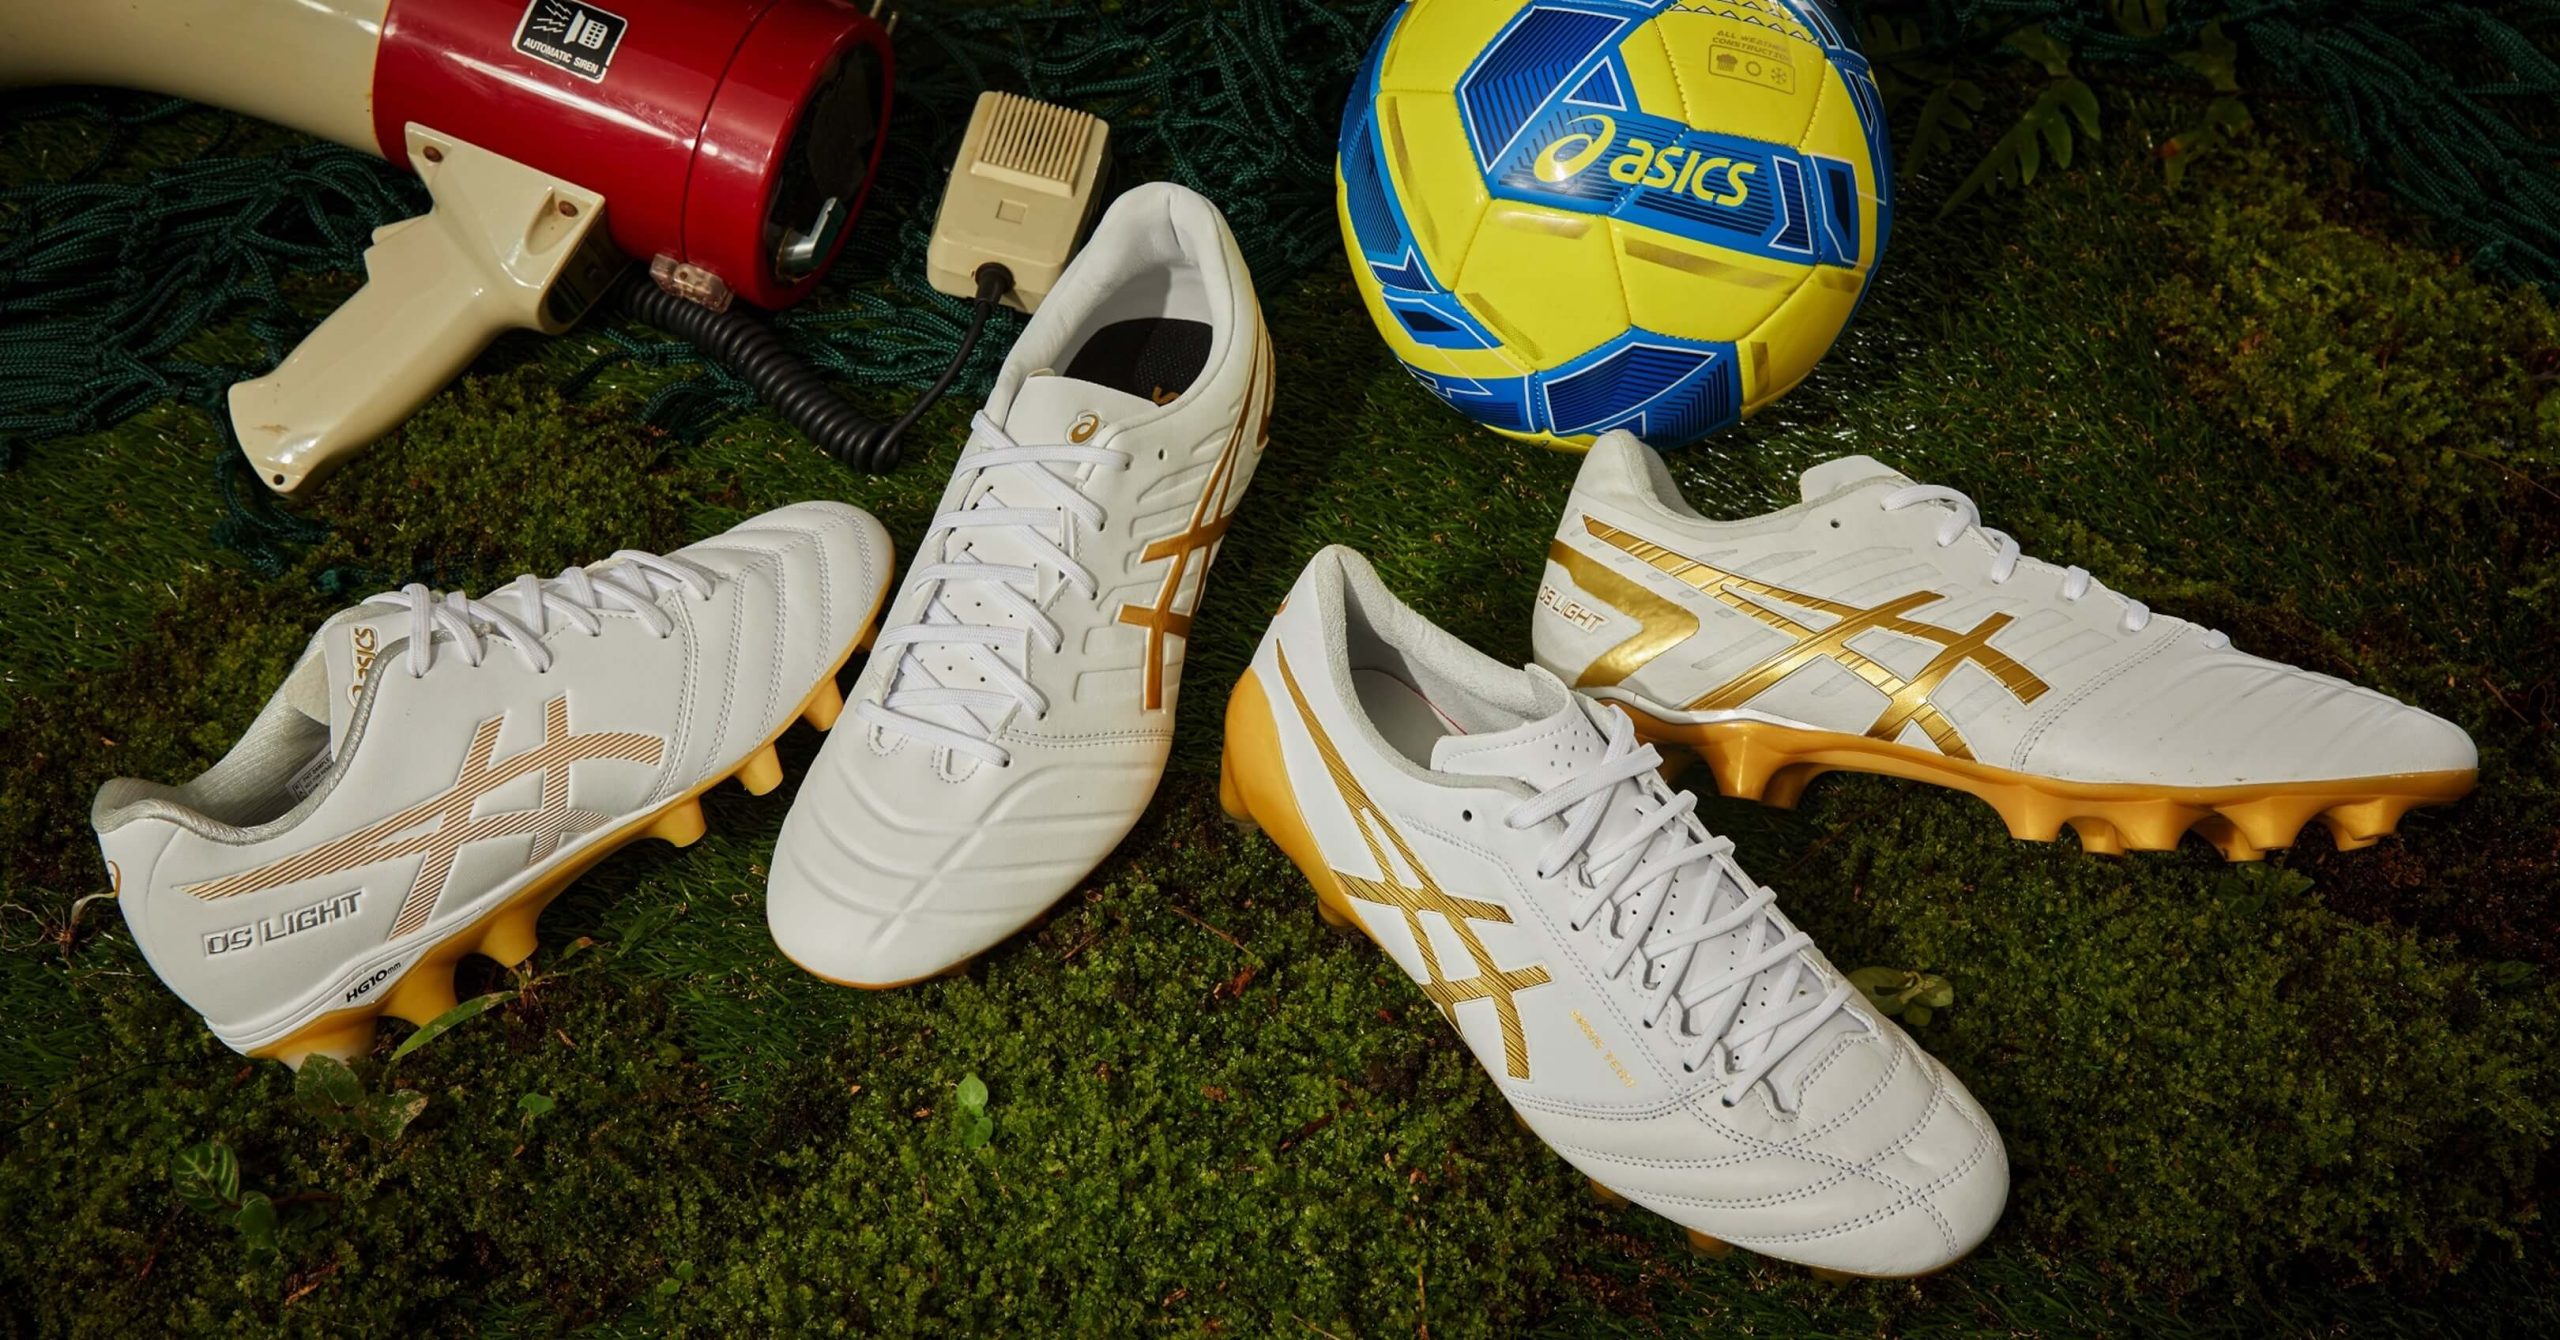 asics-glory-gold-collection-football (1)